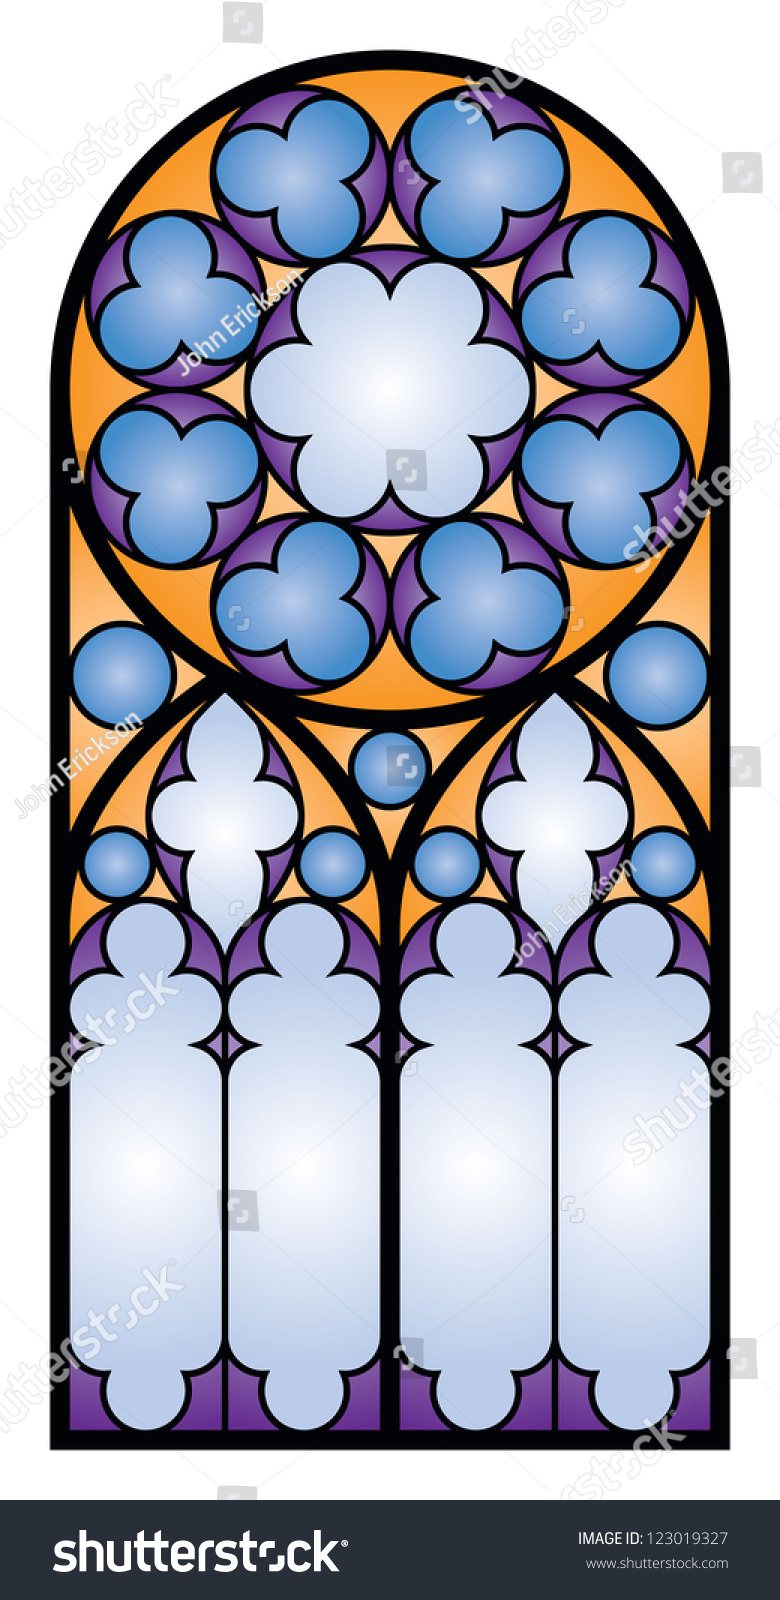 stained glass window clipart free - photo #35